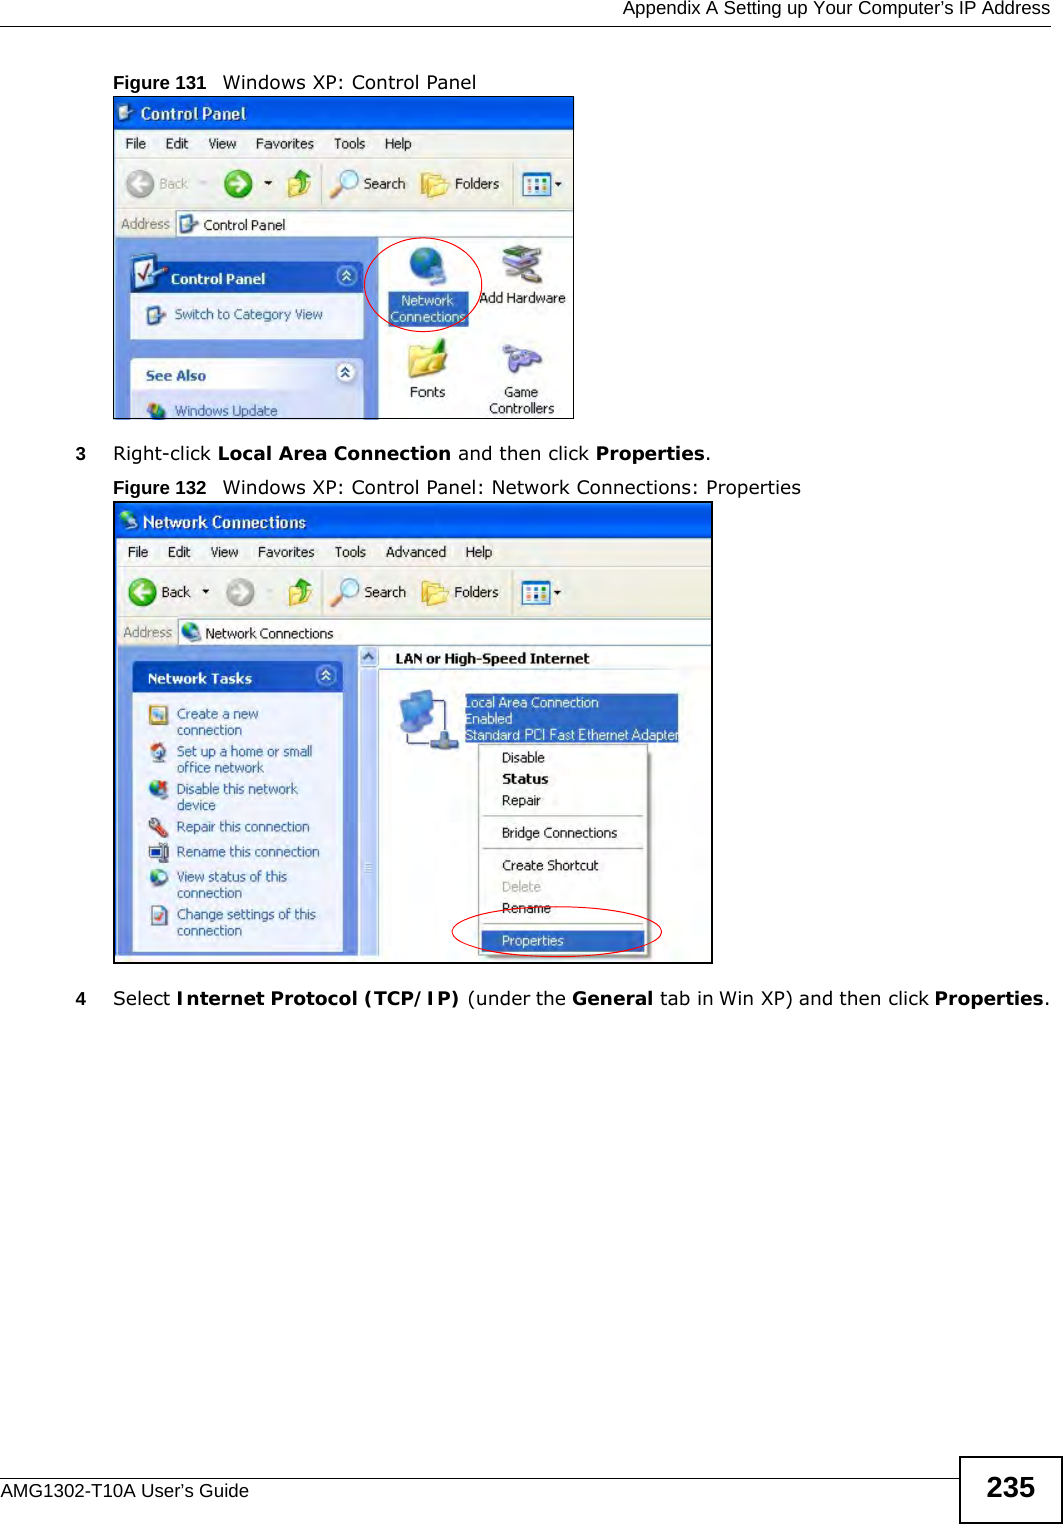  Appendix A Setting up Your Computer’s IP AddressAMG1302-T10A User’s Guide 235Figure 131   Windows XP: Control Panel3Right-click Local Area Connection and then click Properties.Figure 132   Windows XP: Control Panel: Network Connections: Properties4Select Internet Protocol (TCP/IP) (under the General tab in Win XP) and then click Properties.